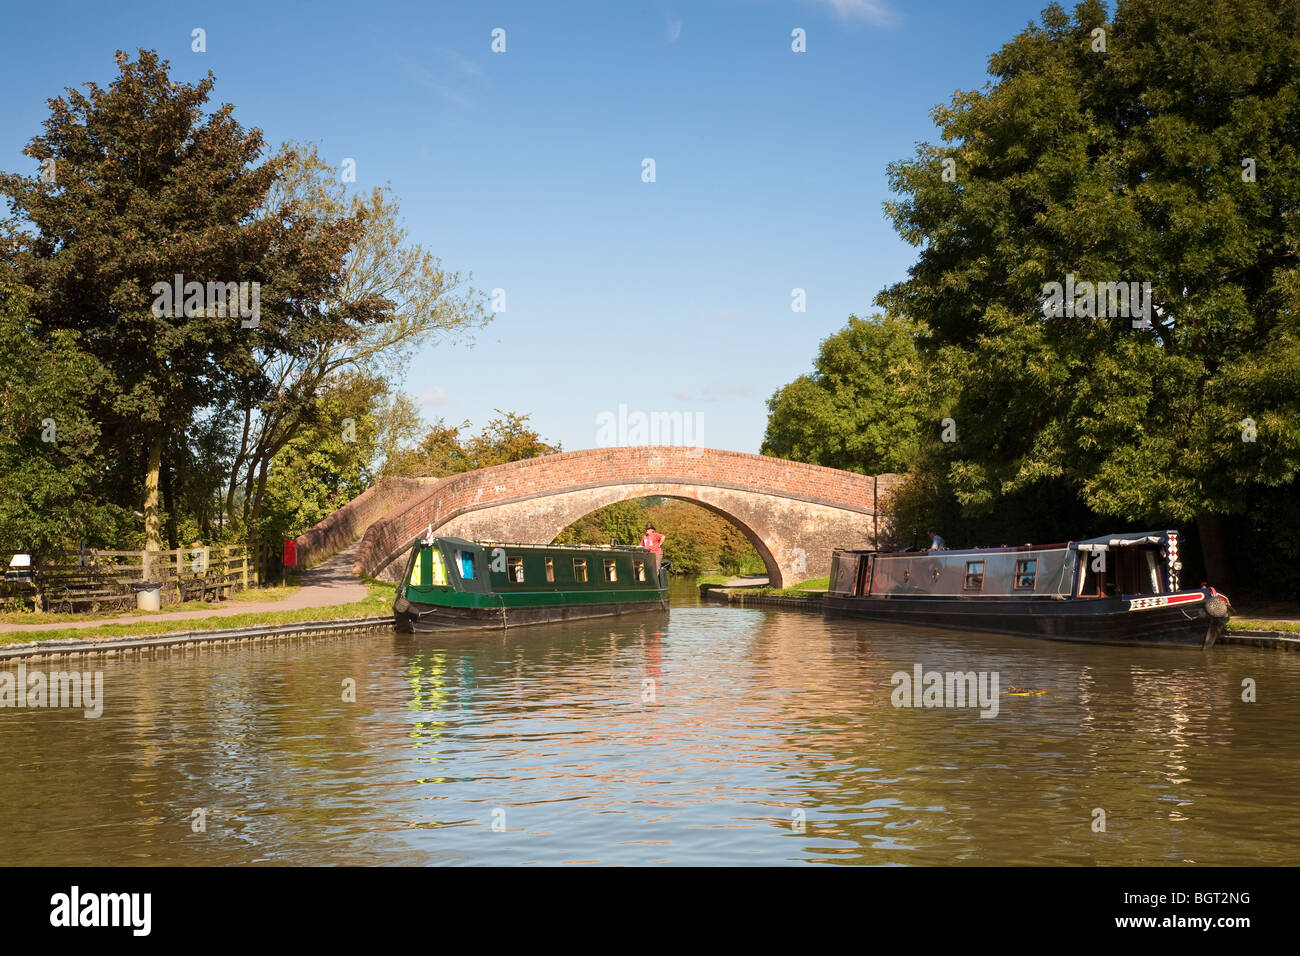 Narrow boats in Foxton basin on the Grand Union canal. Stock Photo